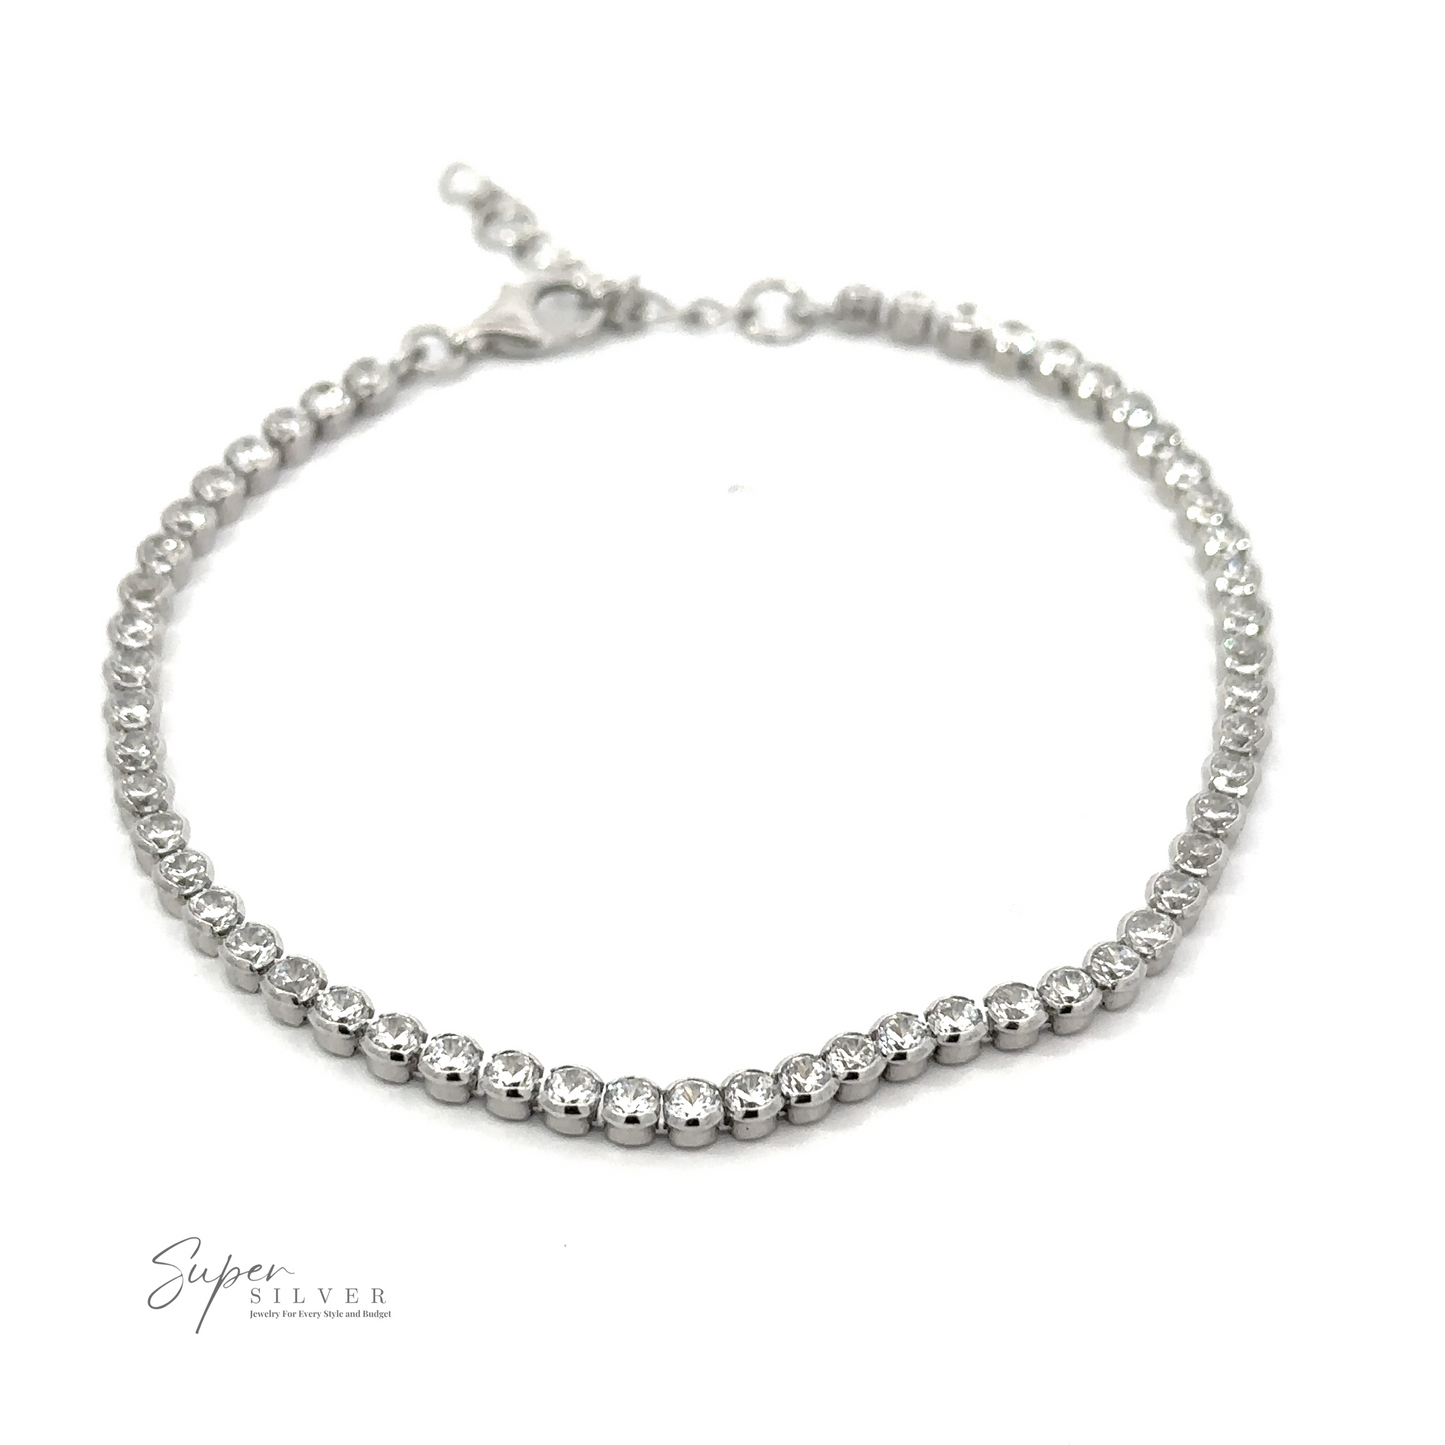 
                  
                    A Round Cubic Zirconia Tennis Bracelet adorned with round cubic zirconia gemstones arranged in a row. The dainty accessory features a clasp at one end and is displayed against a plain background. The logo "Super Silver" is visible in the corner.
                  
                